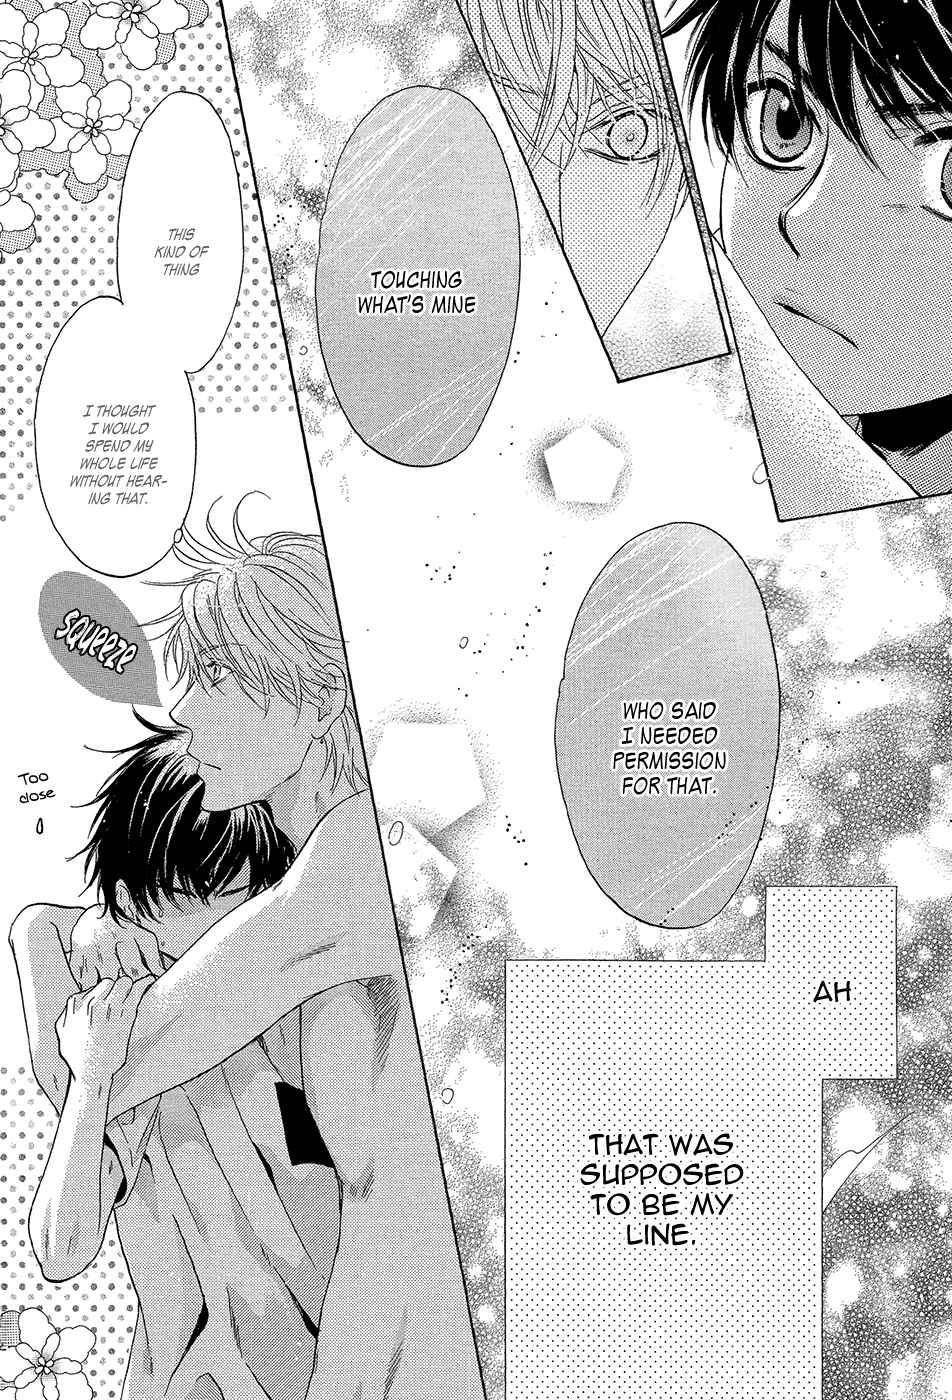 Super Lovers Ch.0